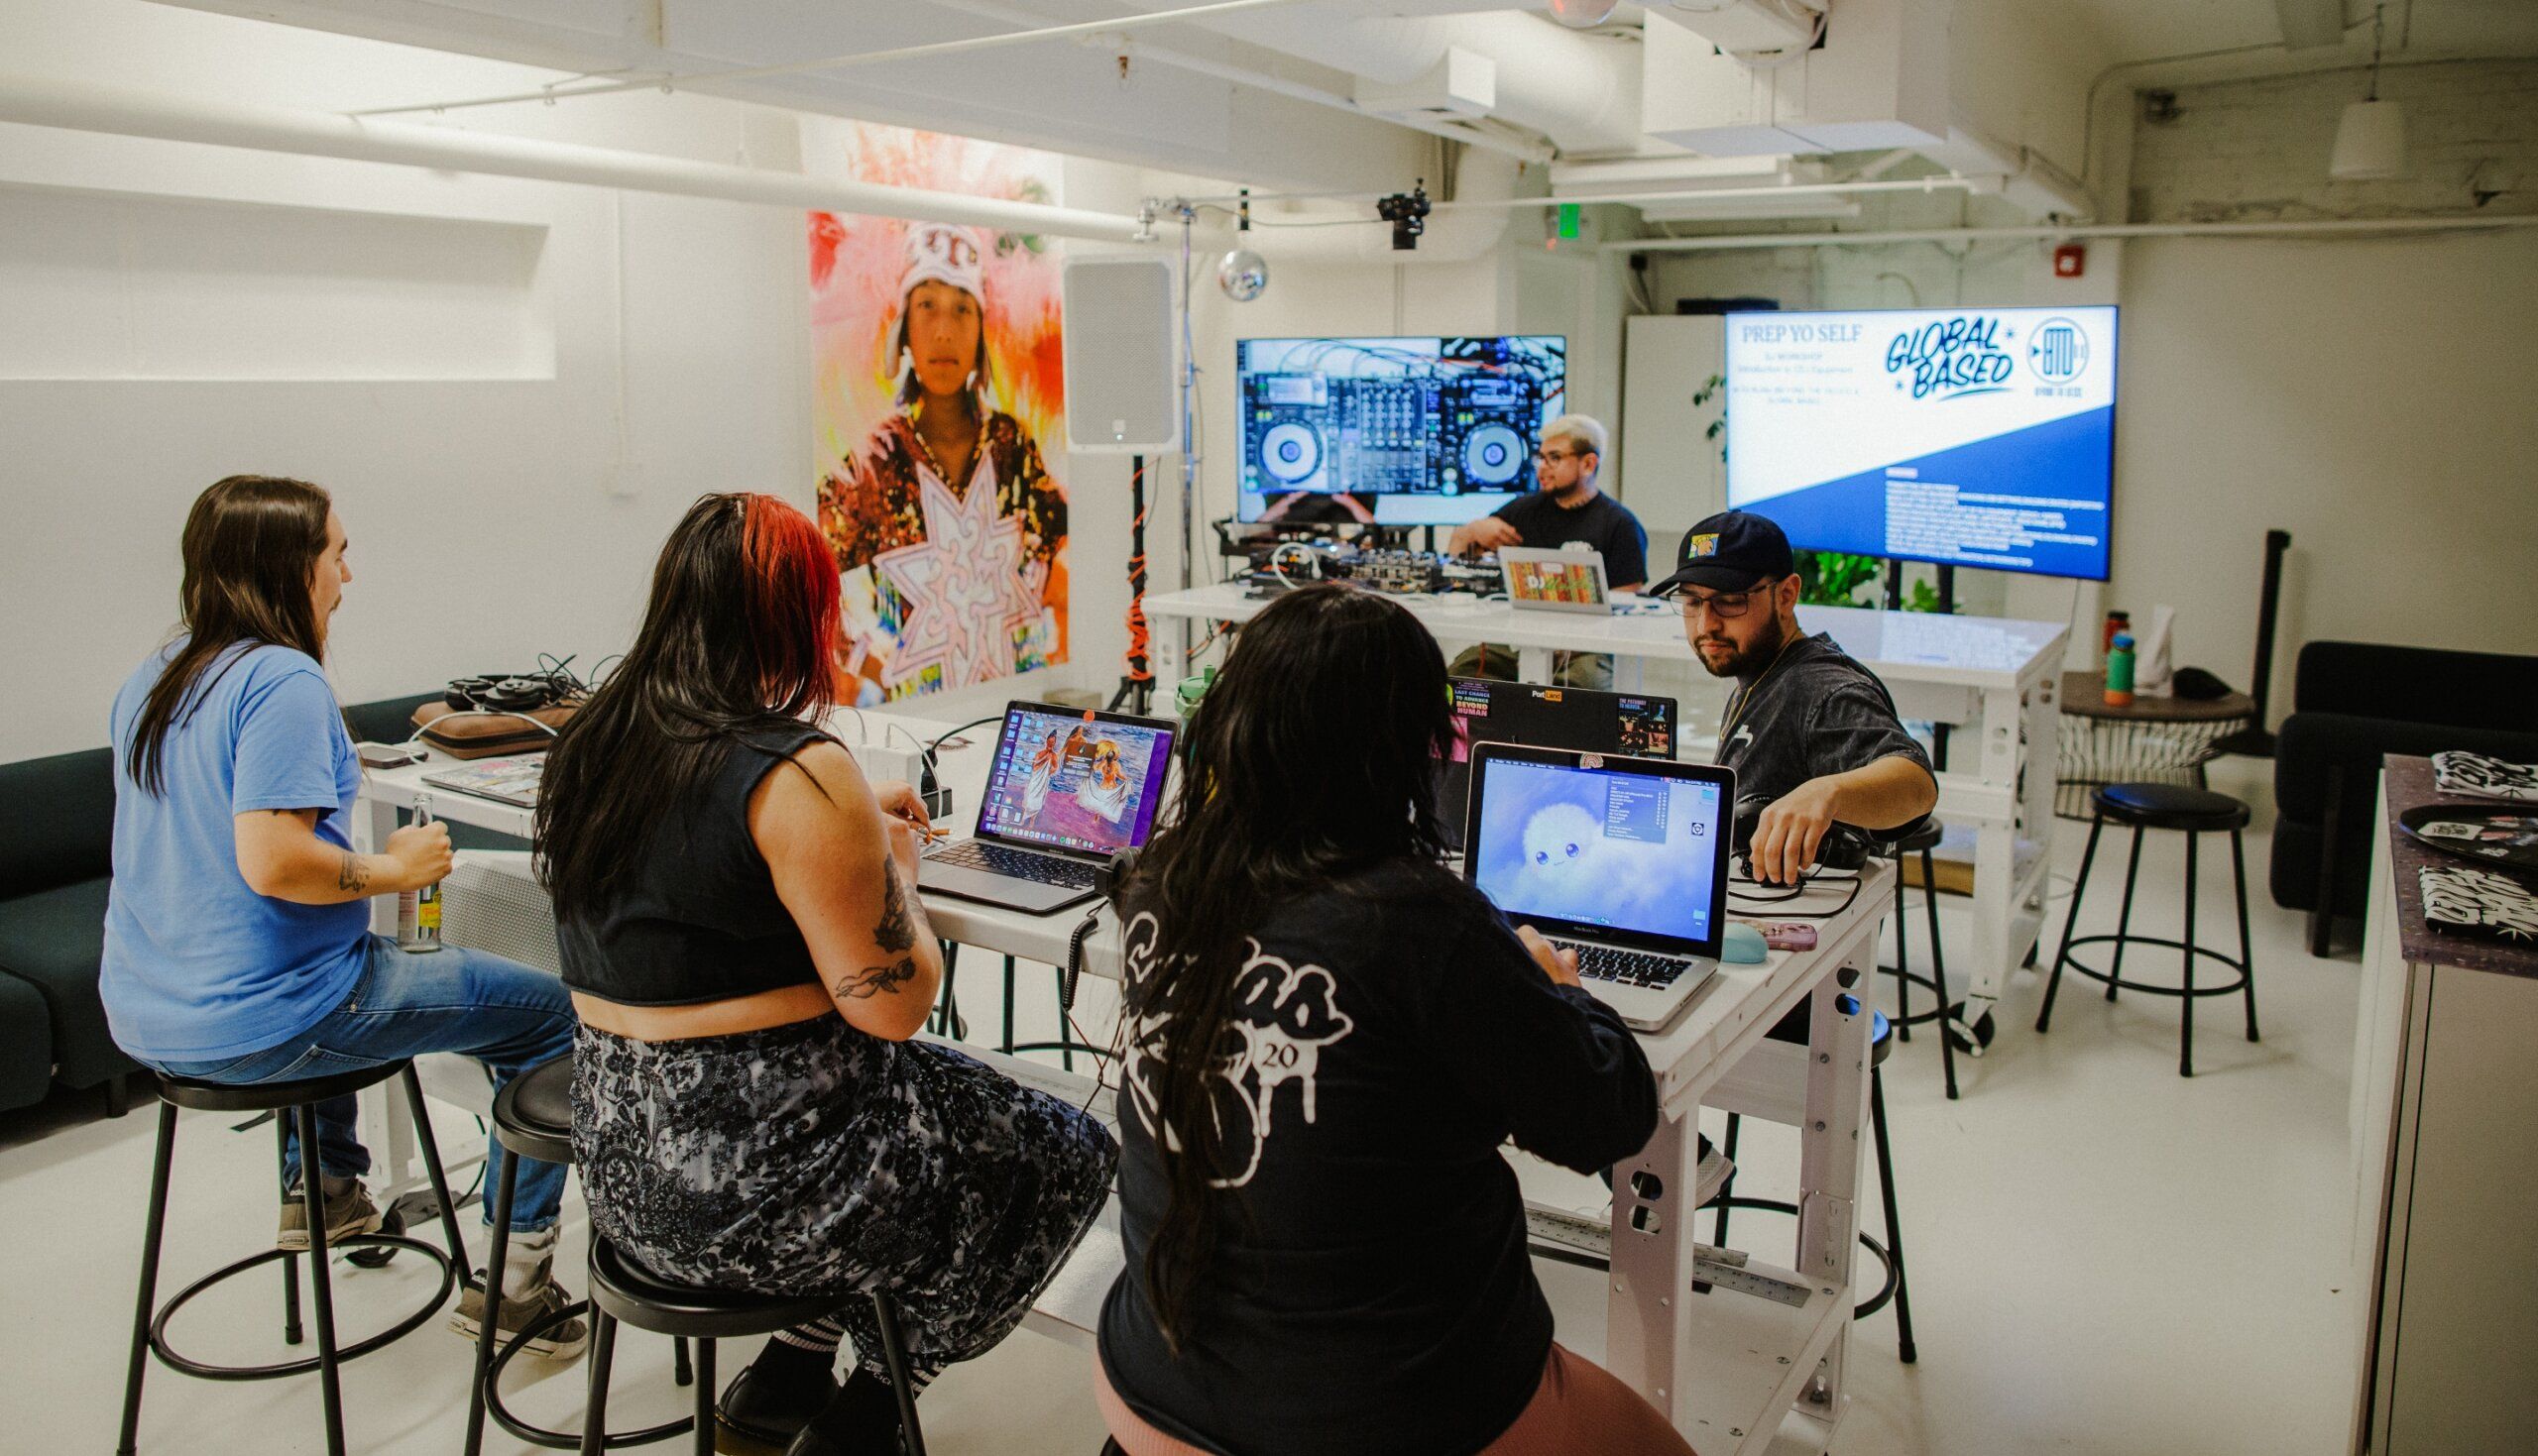 Several people work on laptops at a long table in a room with a large screen displaying digital art and text.